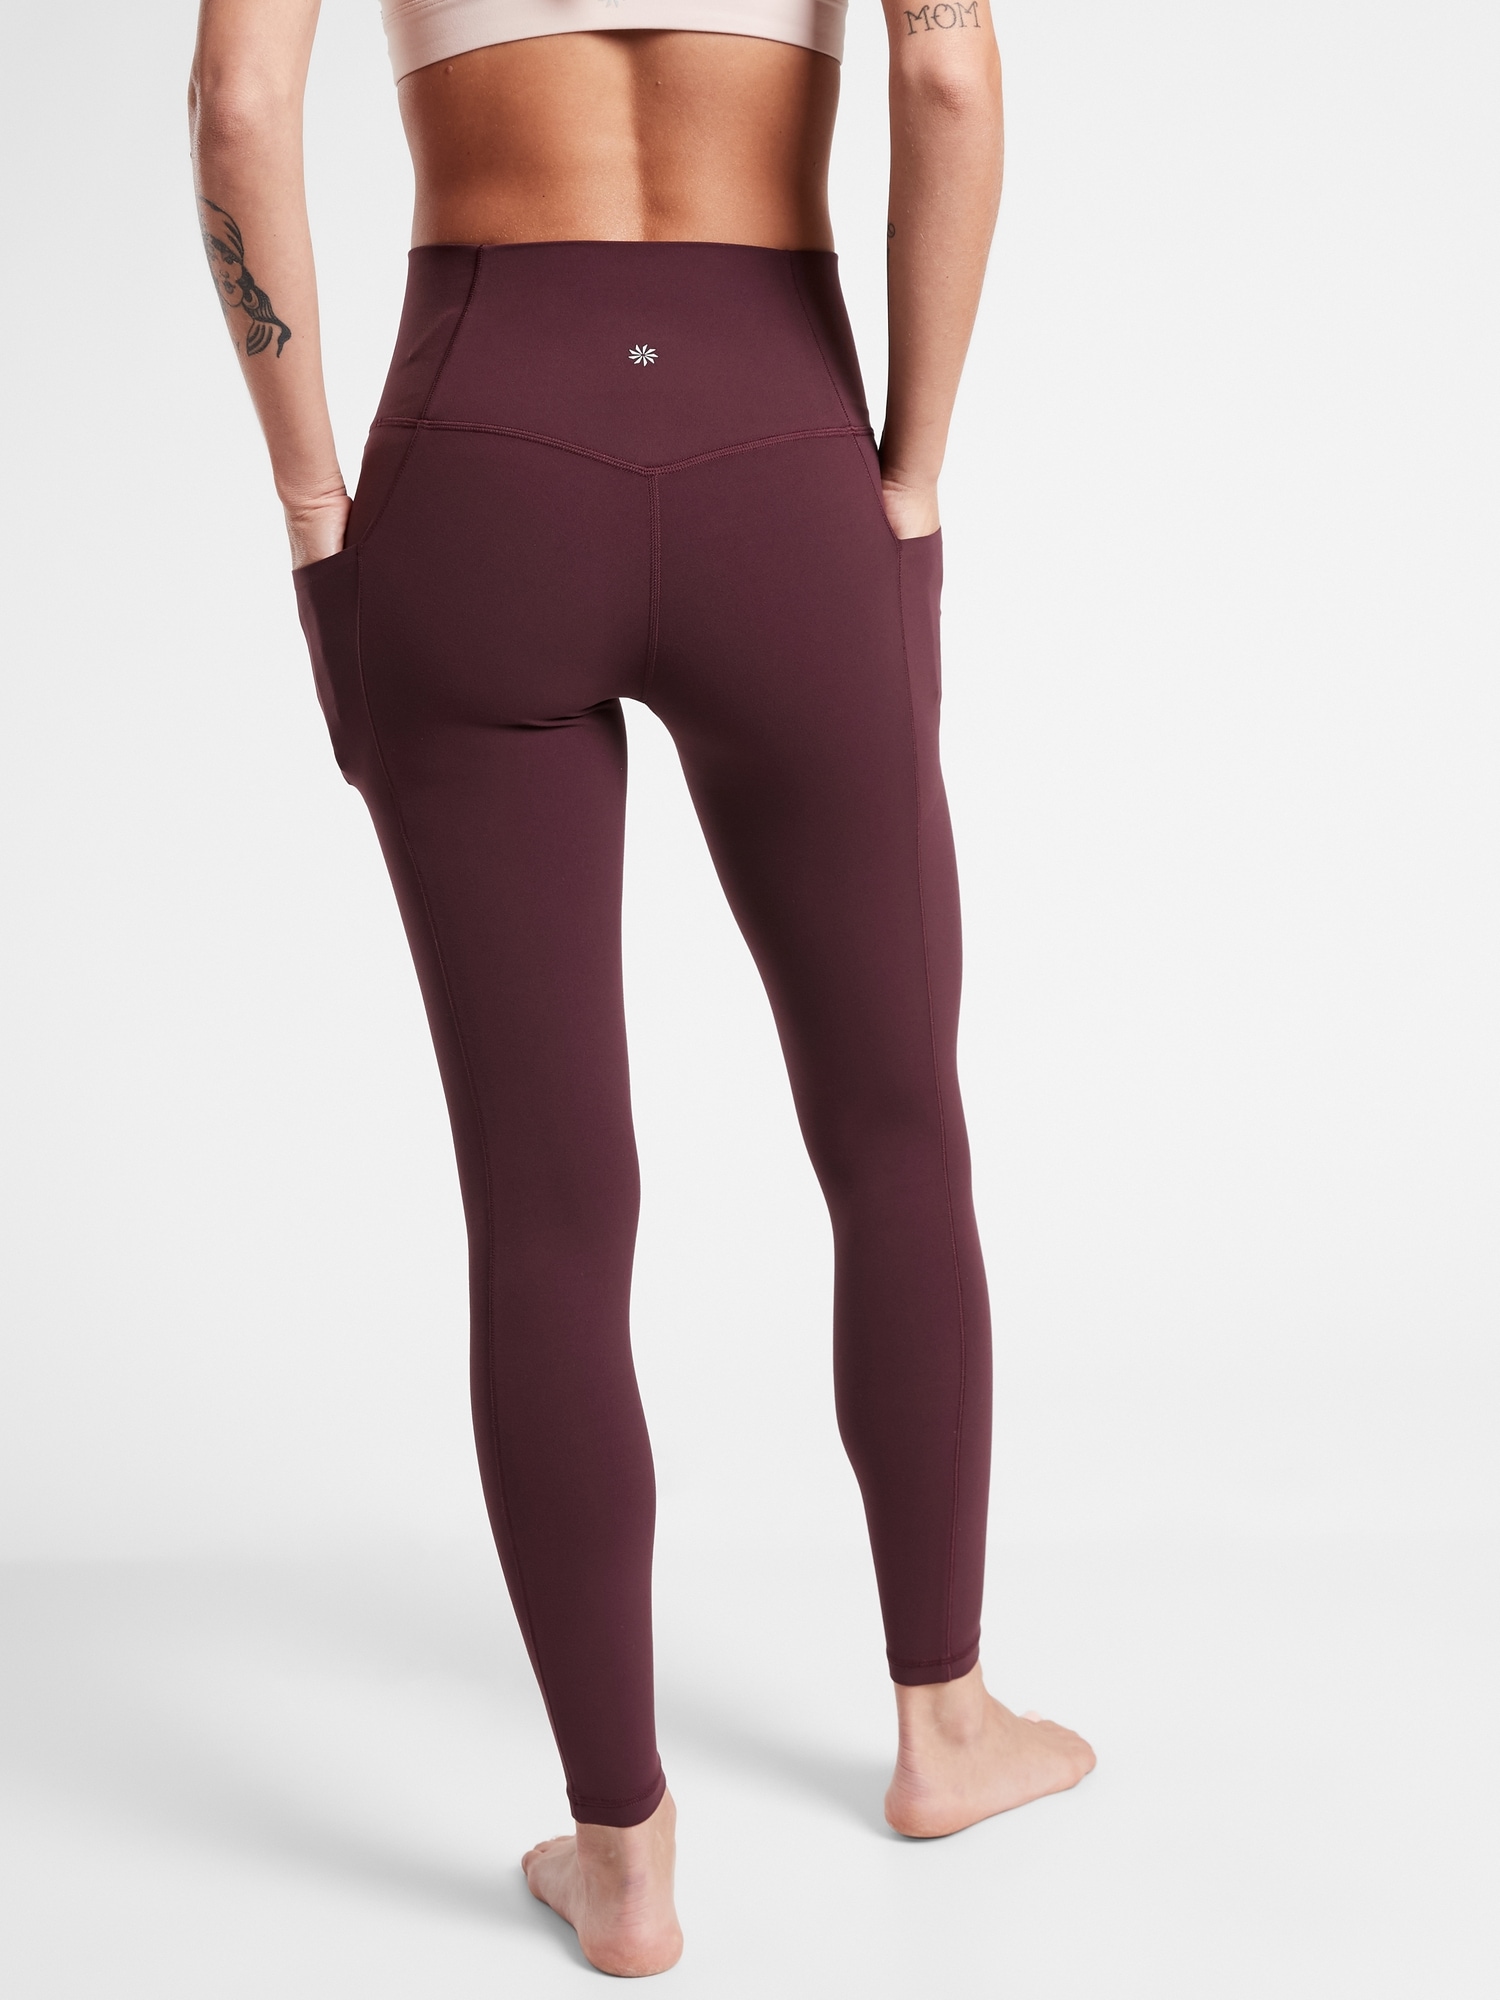 Athleta Revelation Review | Tested by GearLab